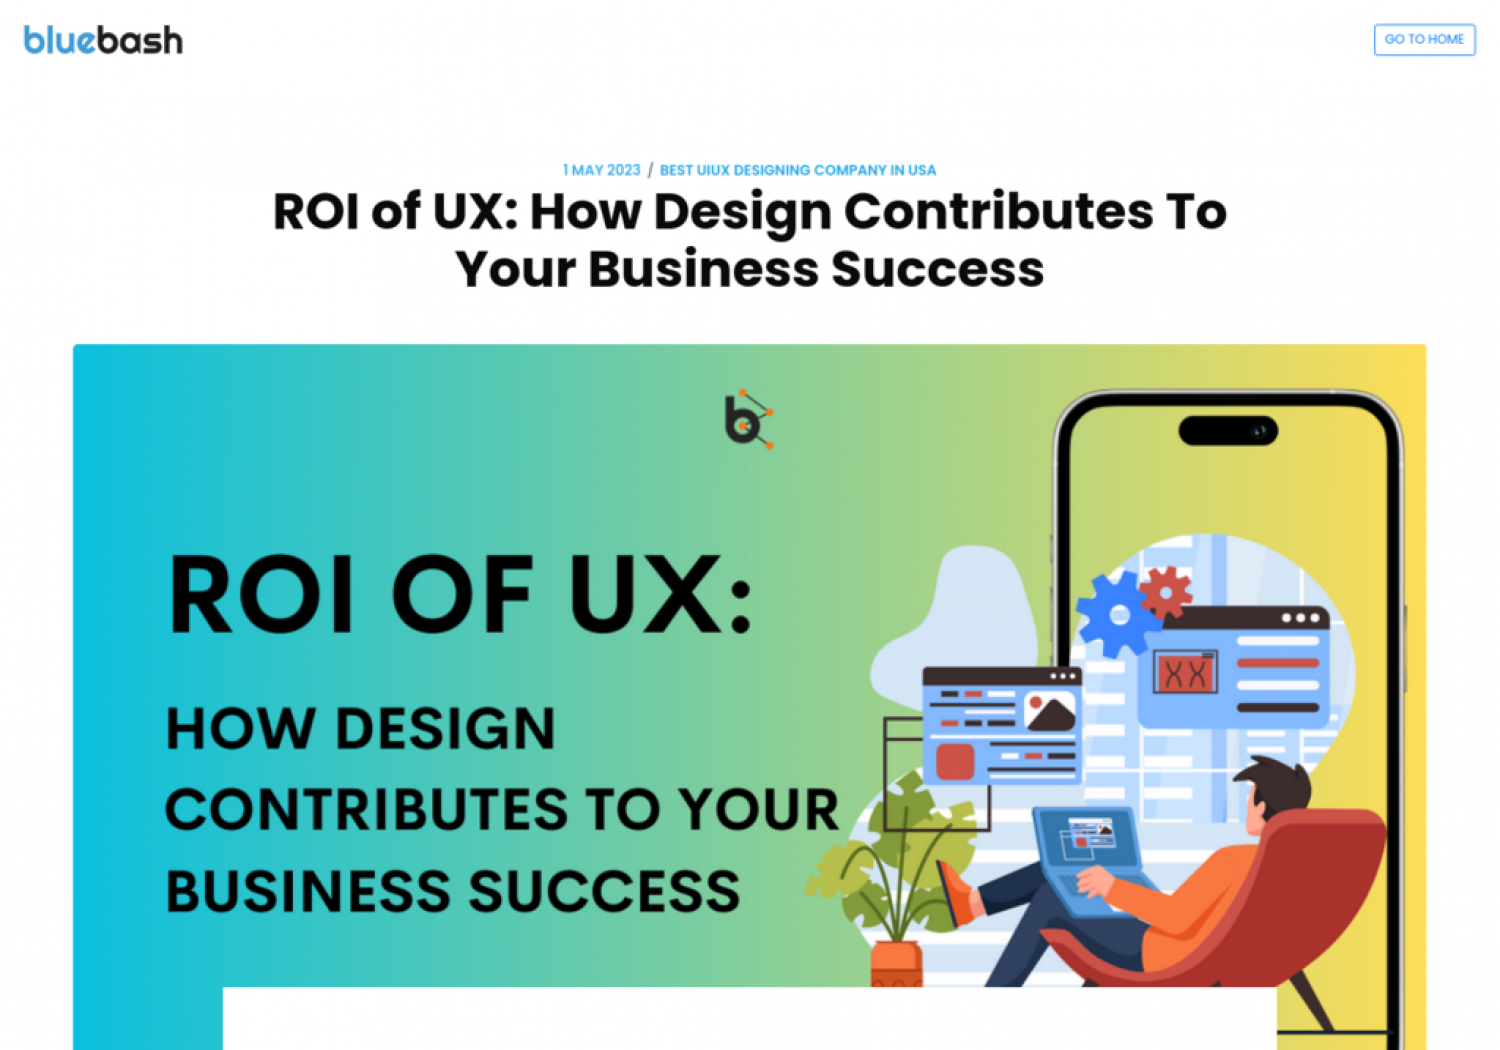 ROI of UX: How Design Contributes To Your Business Success Infographic